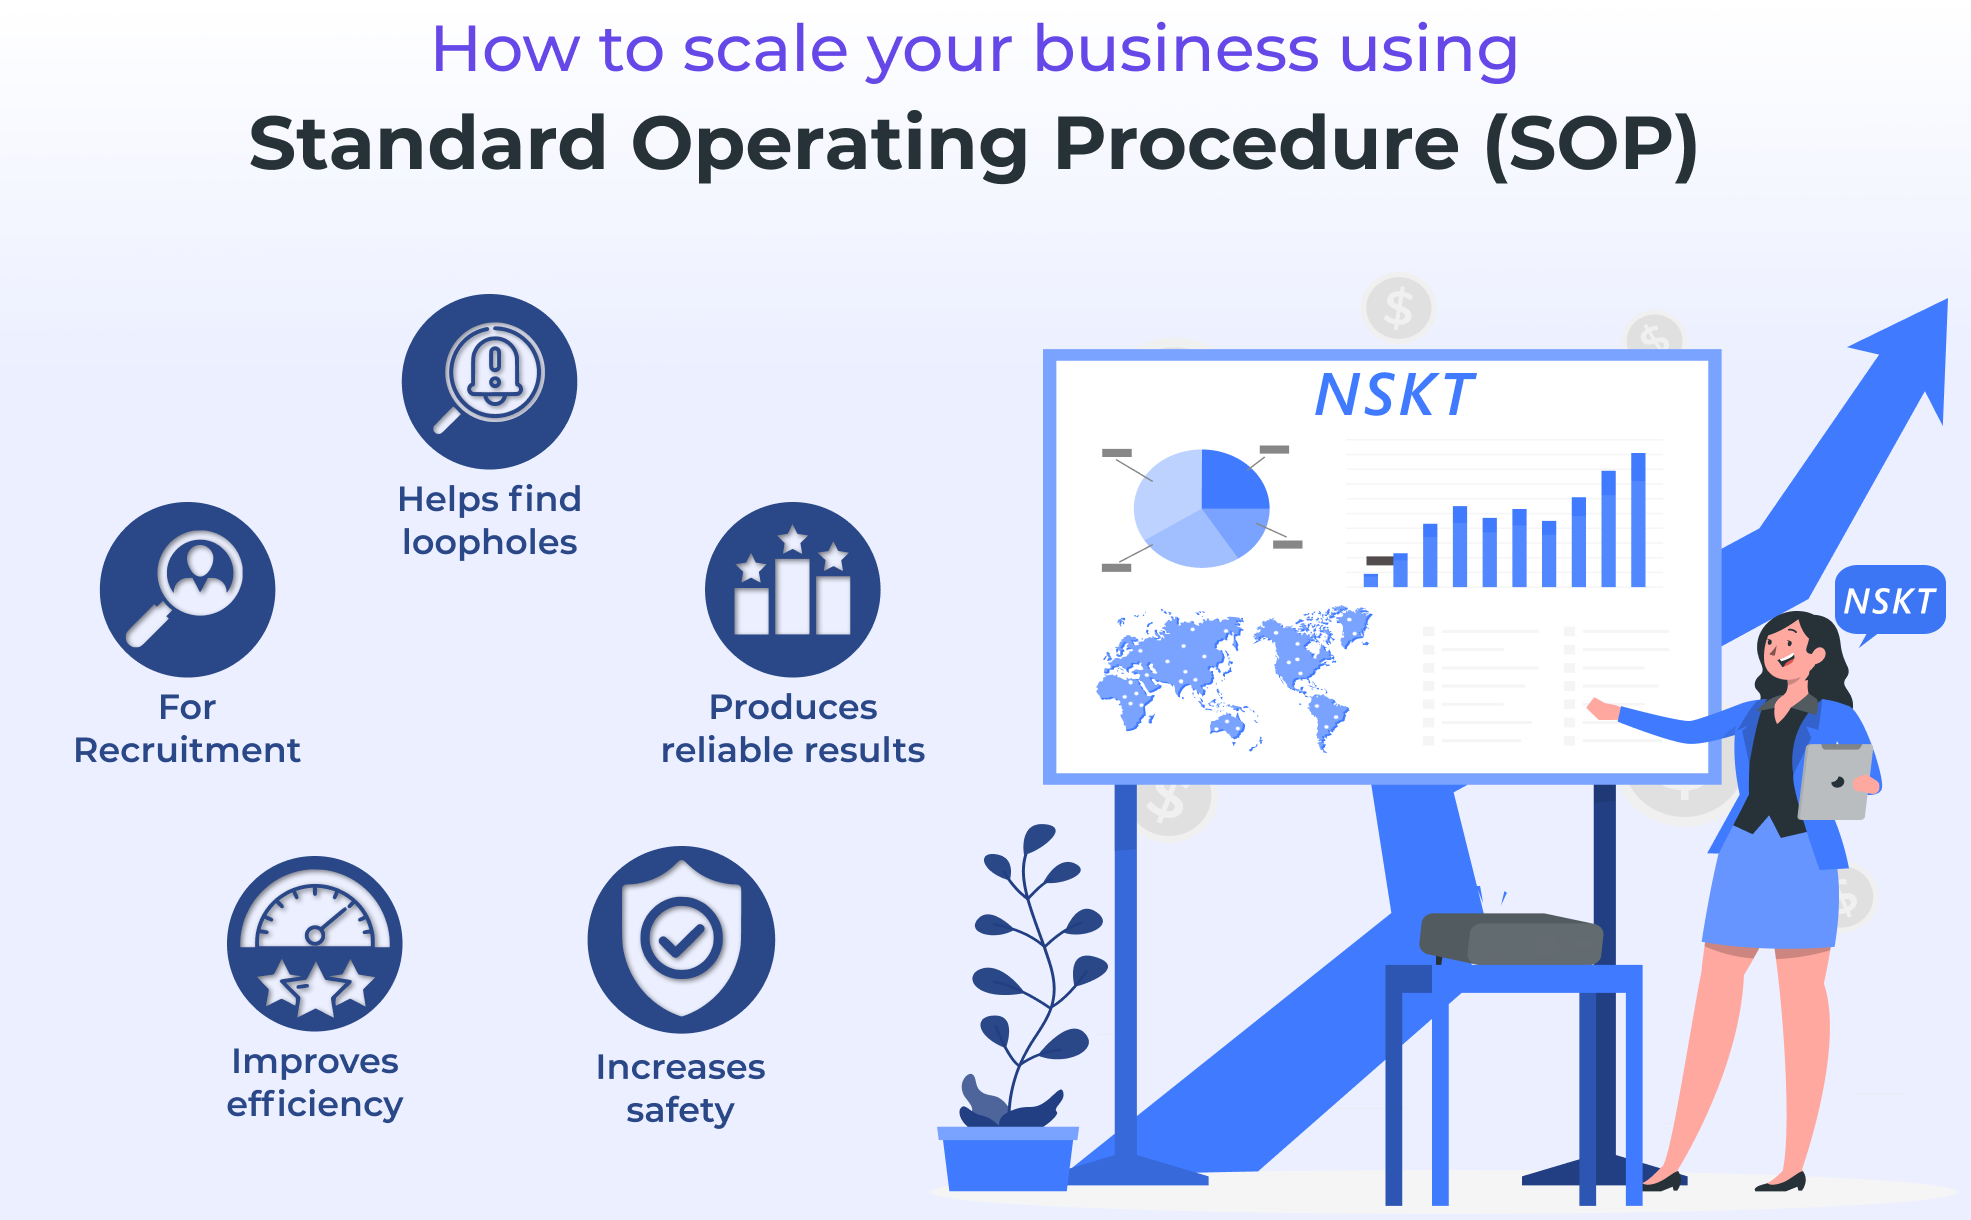 How to scale your business using Standard Operating Procedure (SOP)